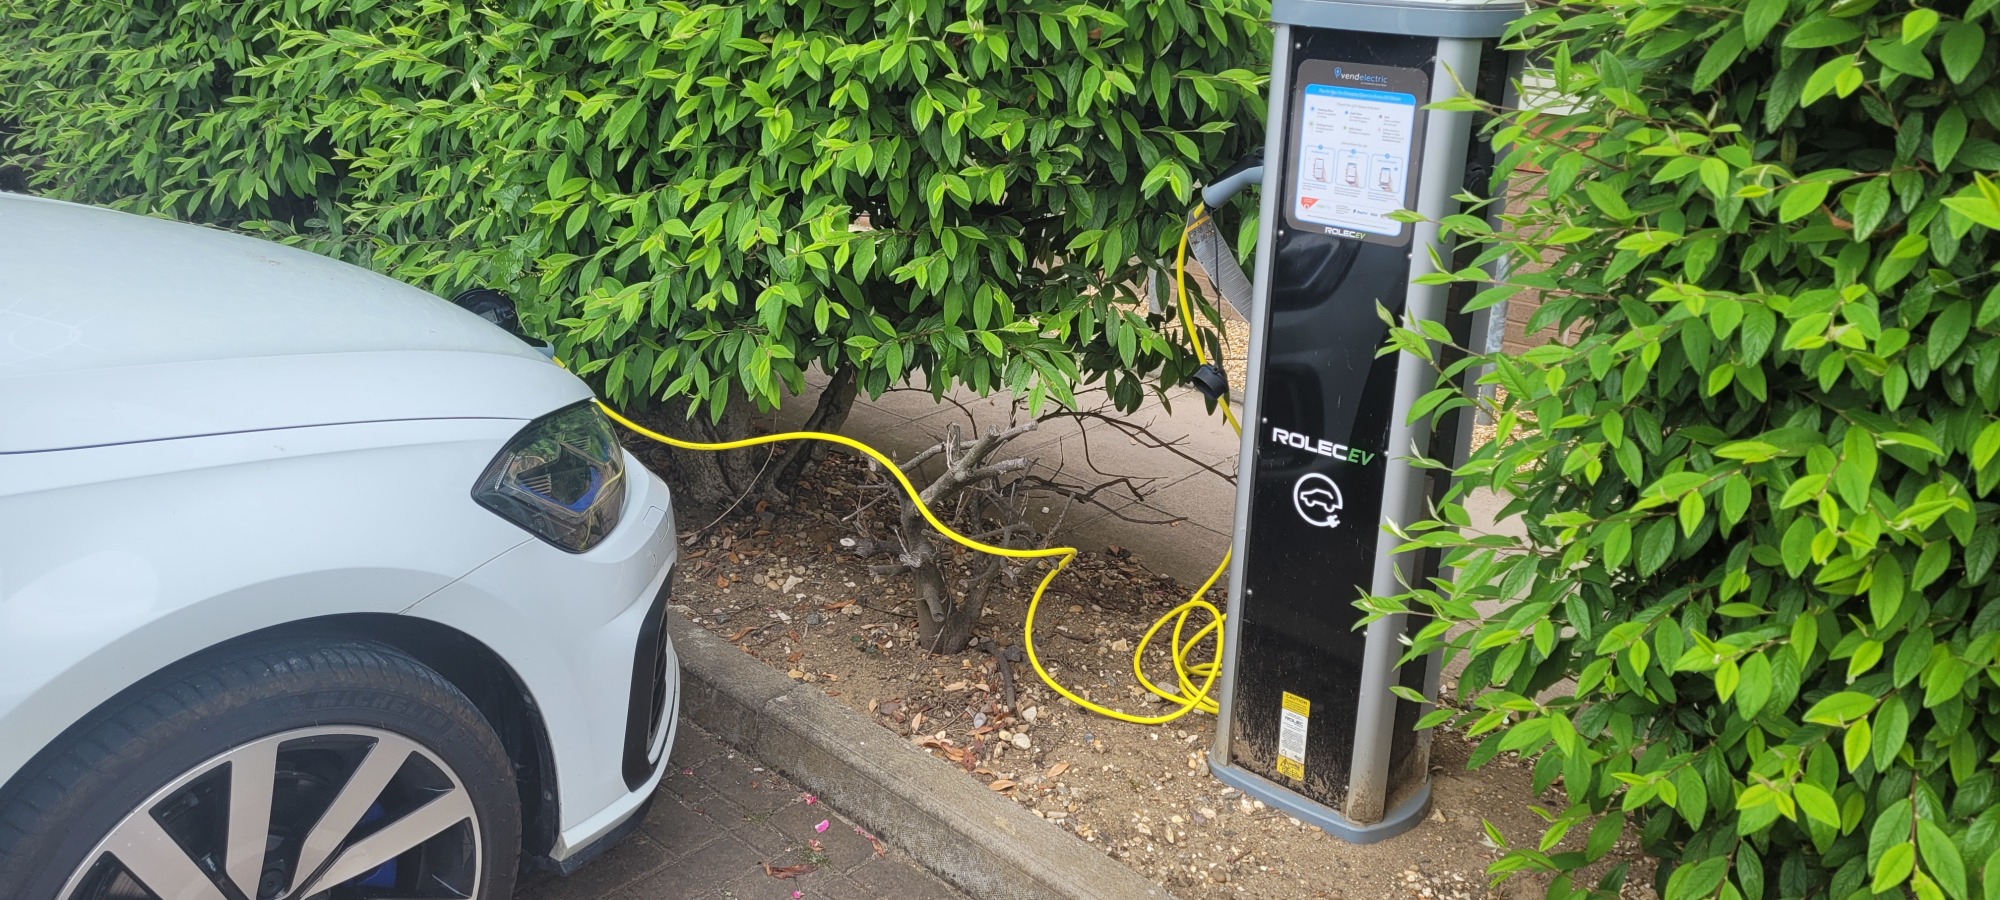 Willmott Dixon Rolls Out Electric Vehicle Charging Points at Over 100 Sites